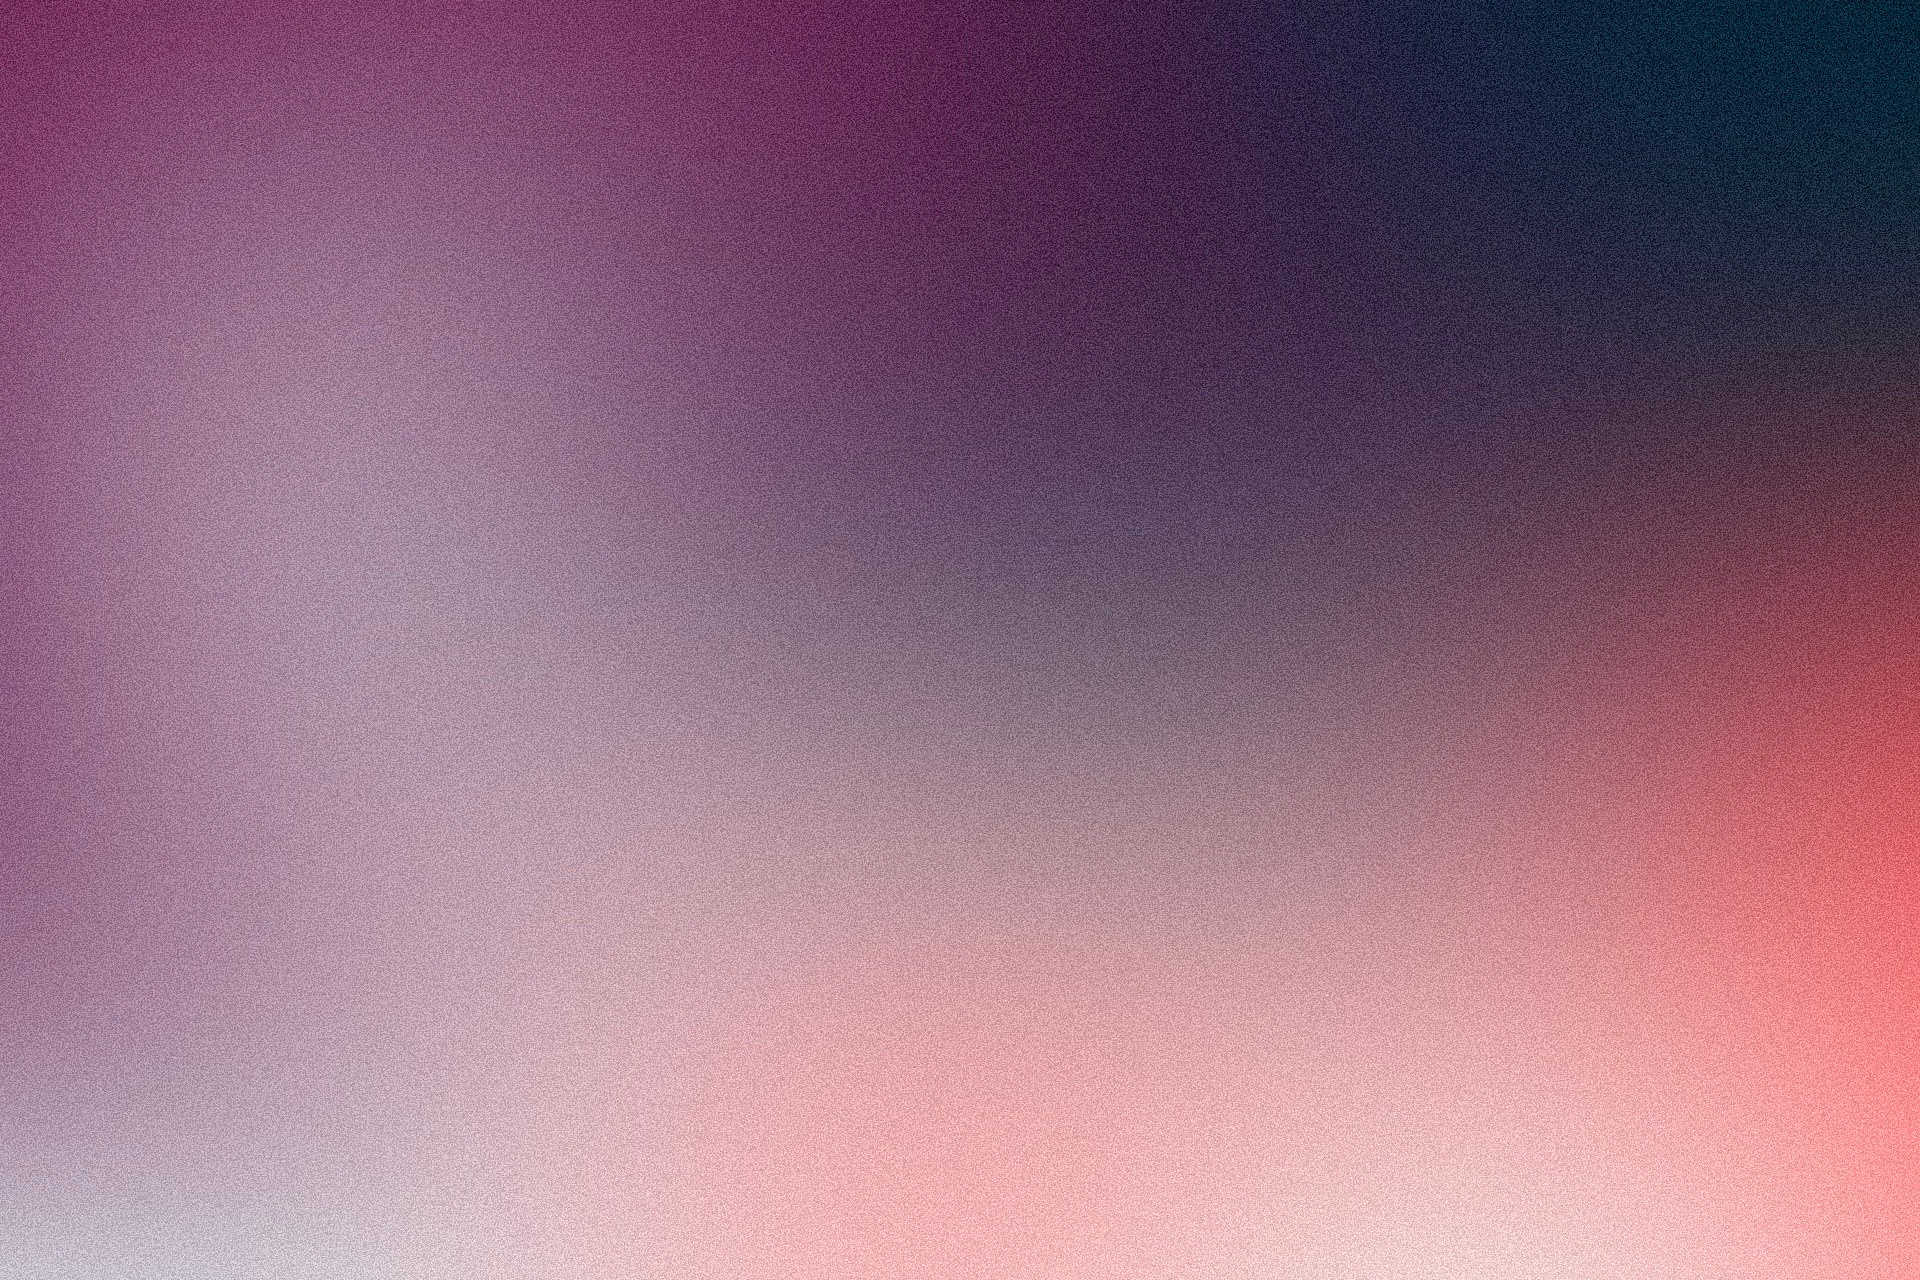 Gradient With Noise Background